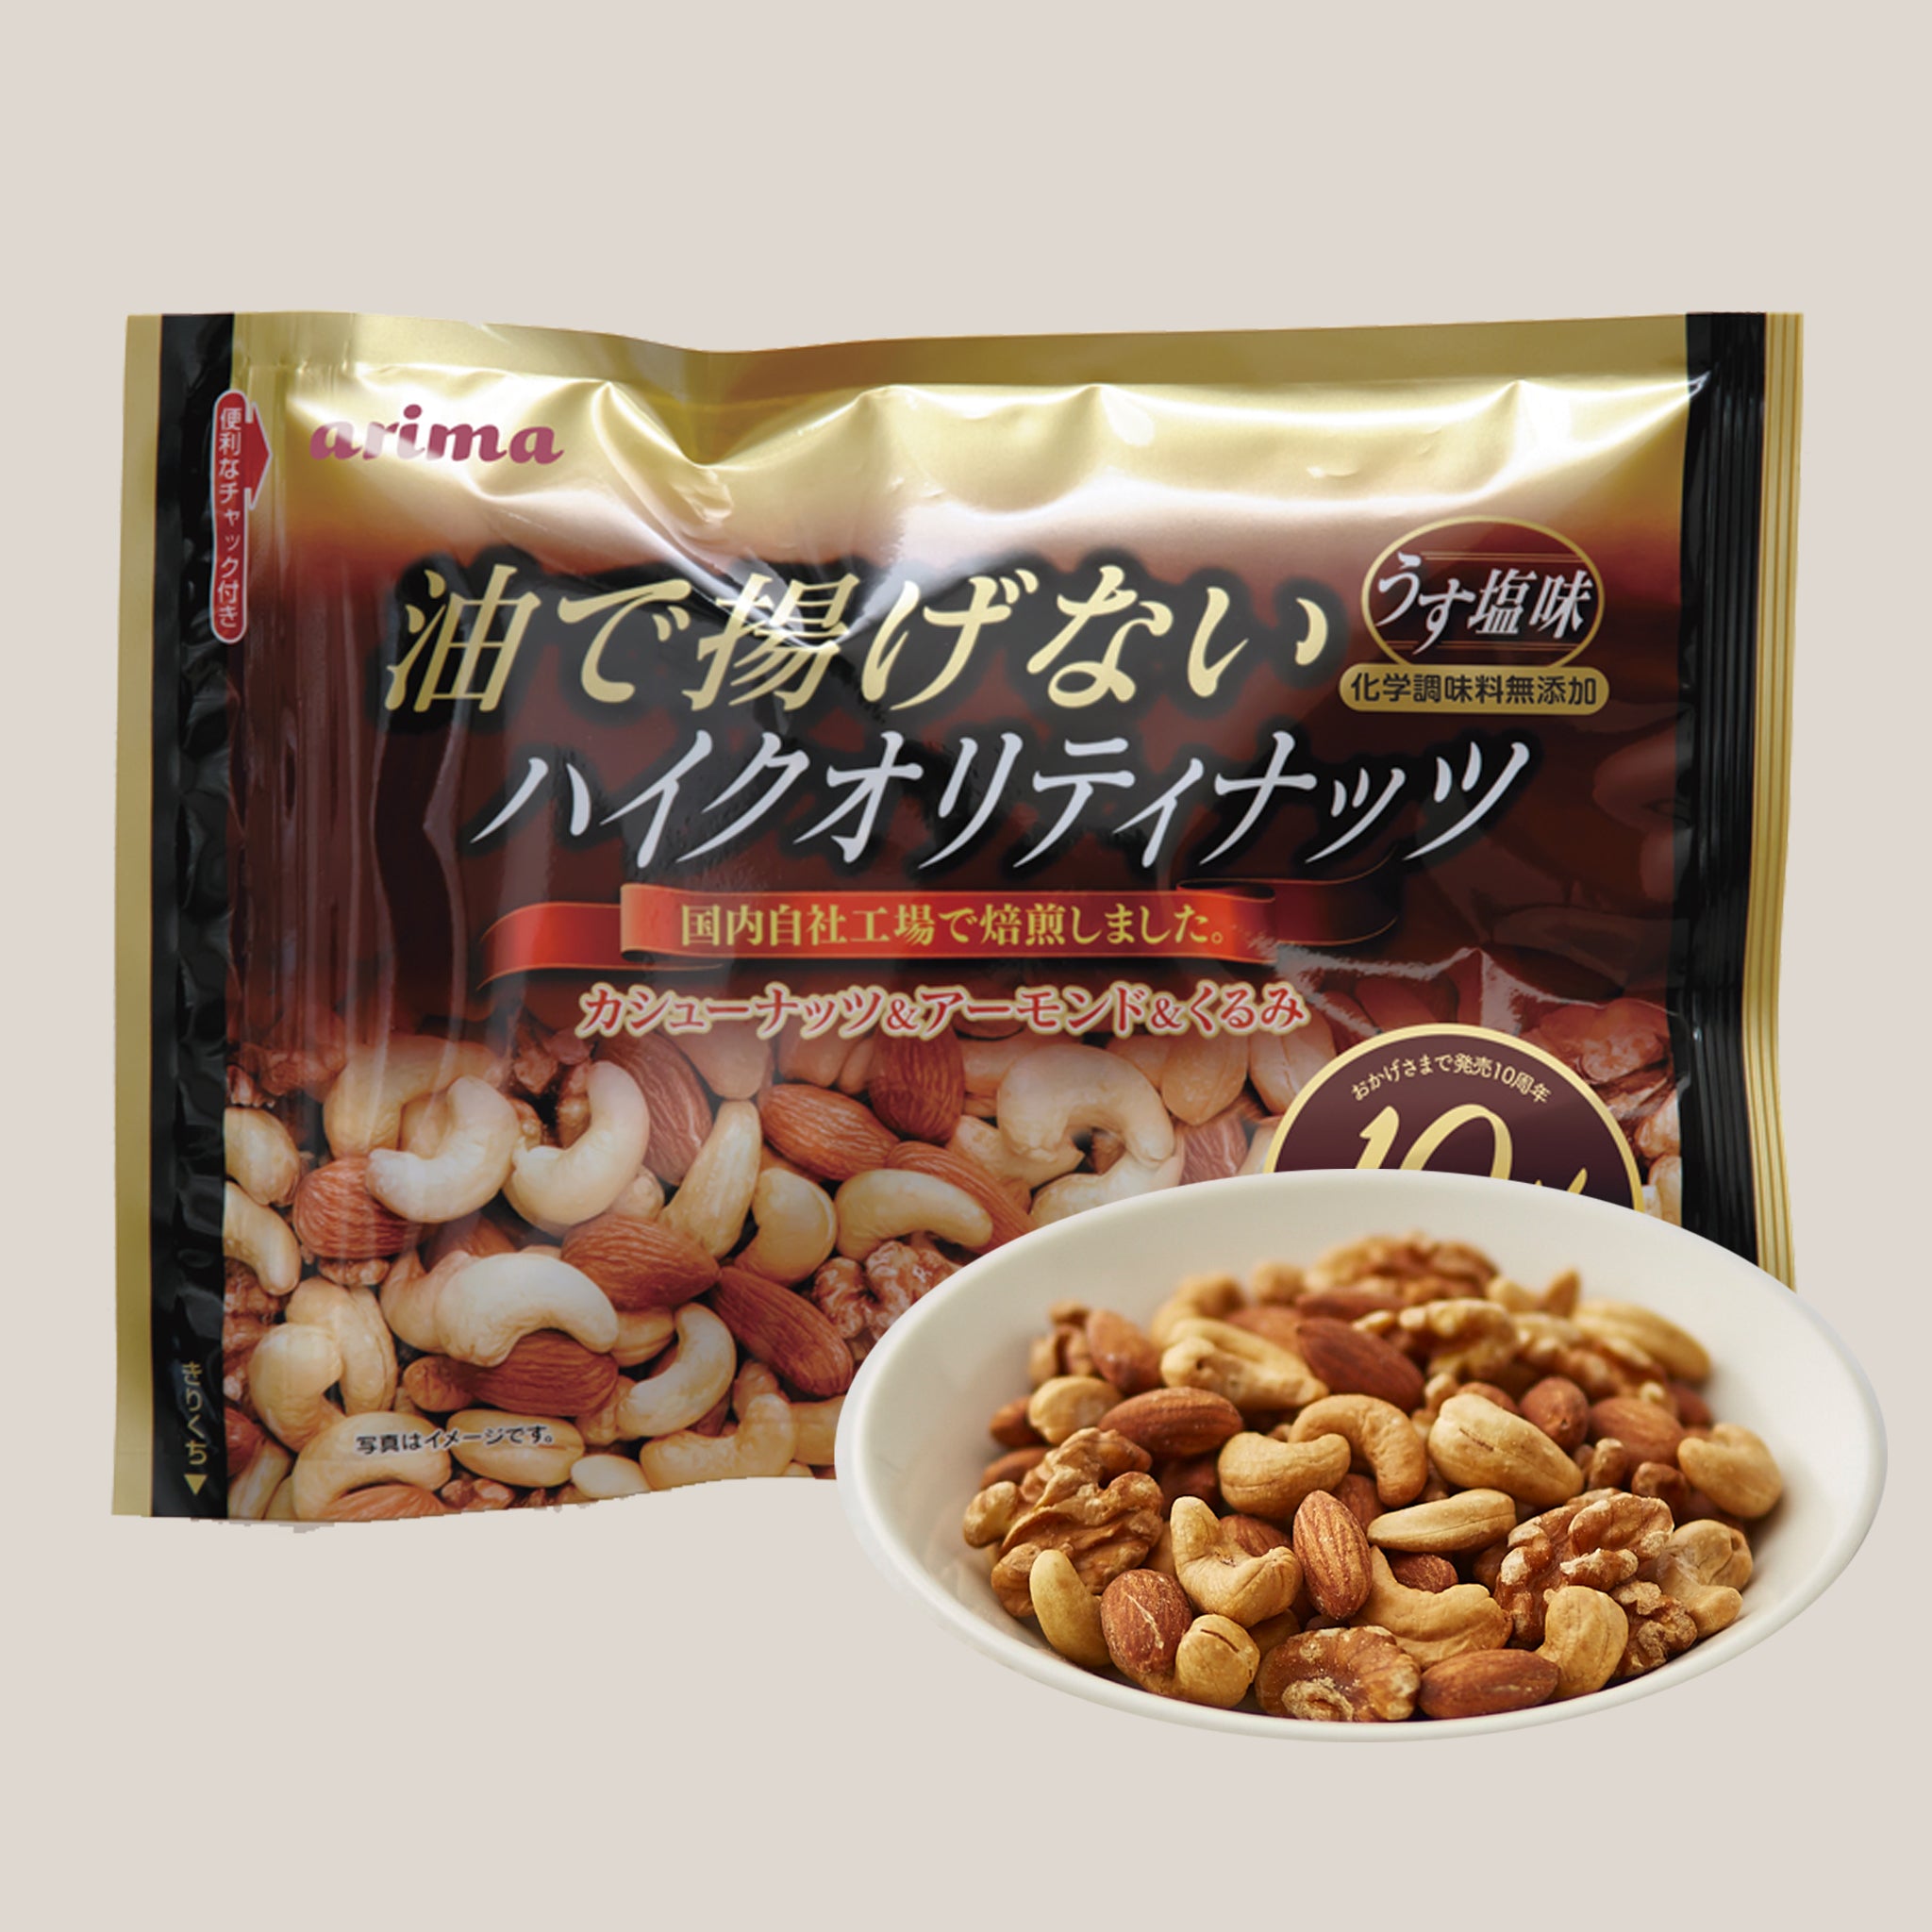 are　嶋ノ屋　Hokodo　that　High　in　not　160g　Arima　quality　oil　fried　nuts　有馬芳香堂